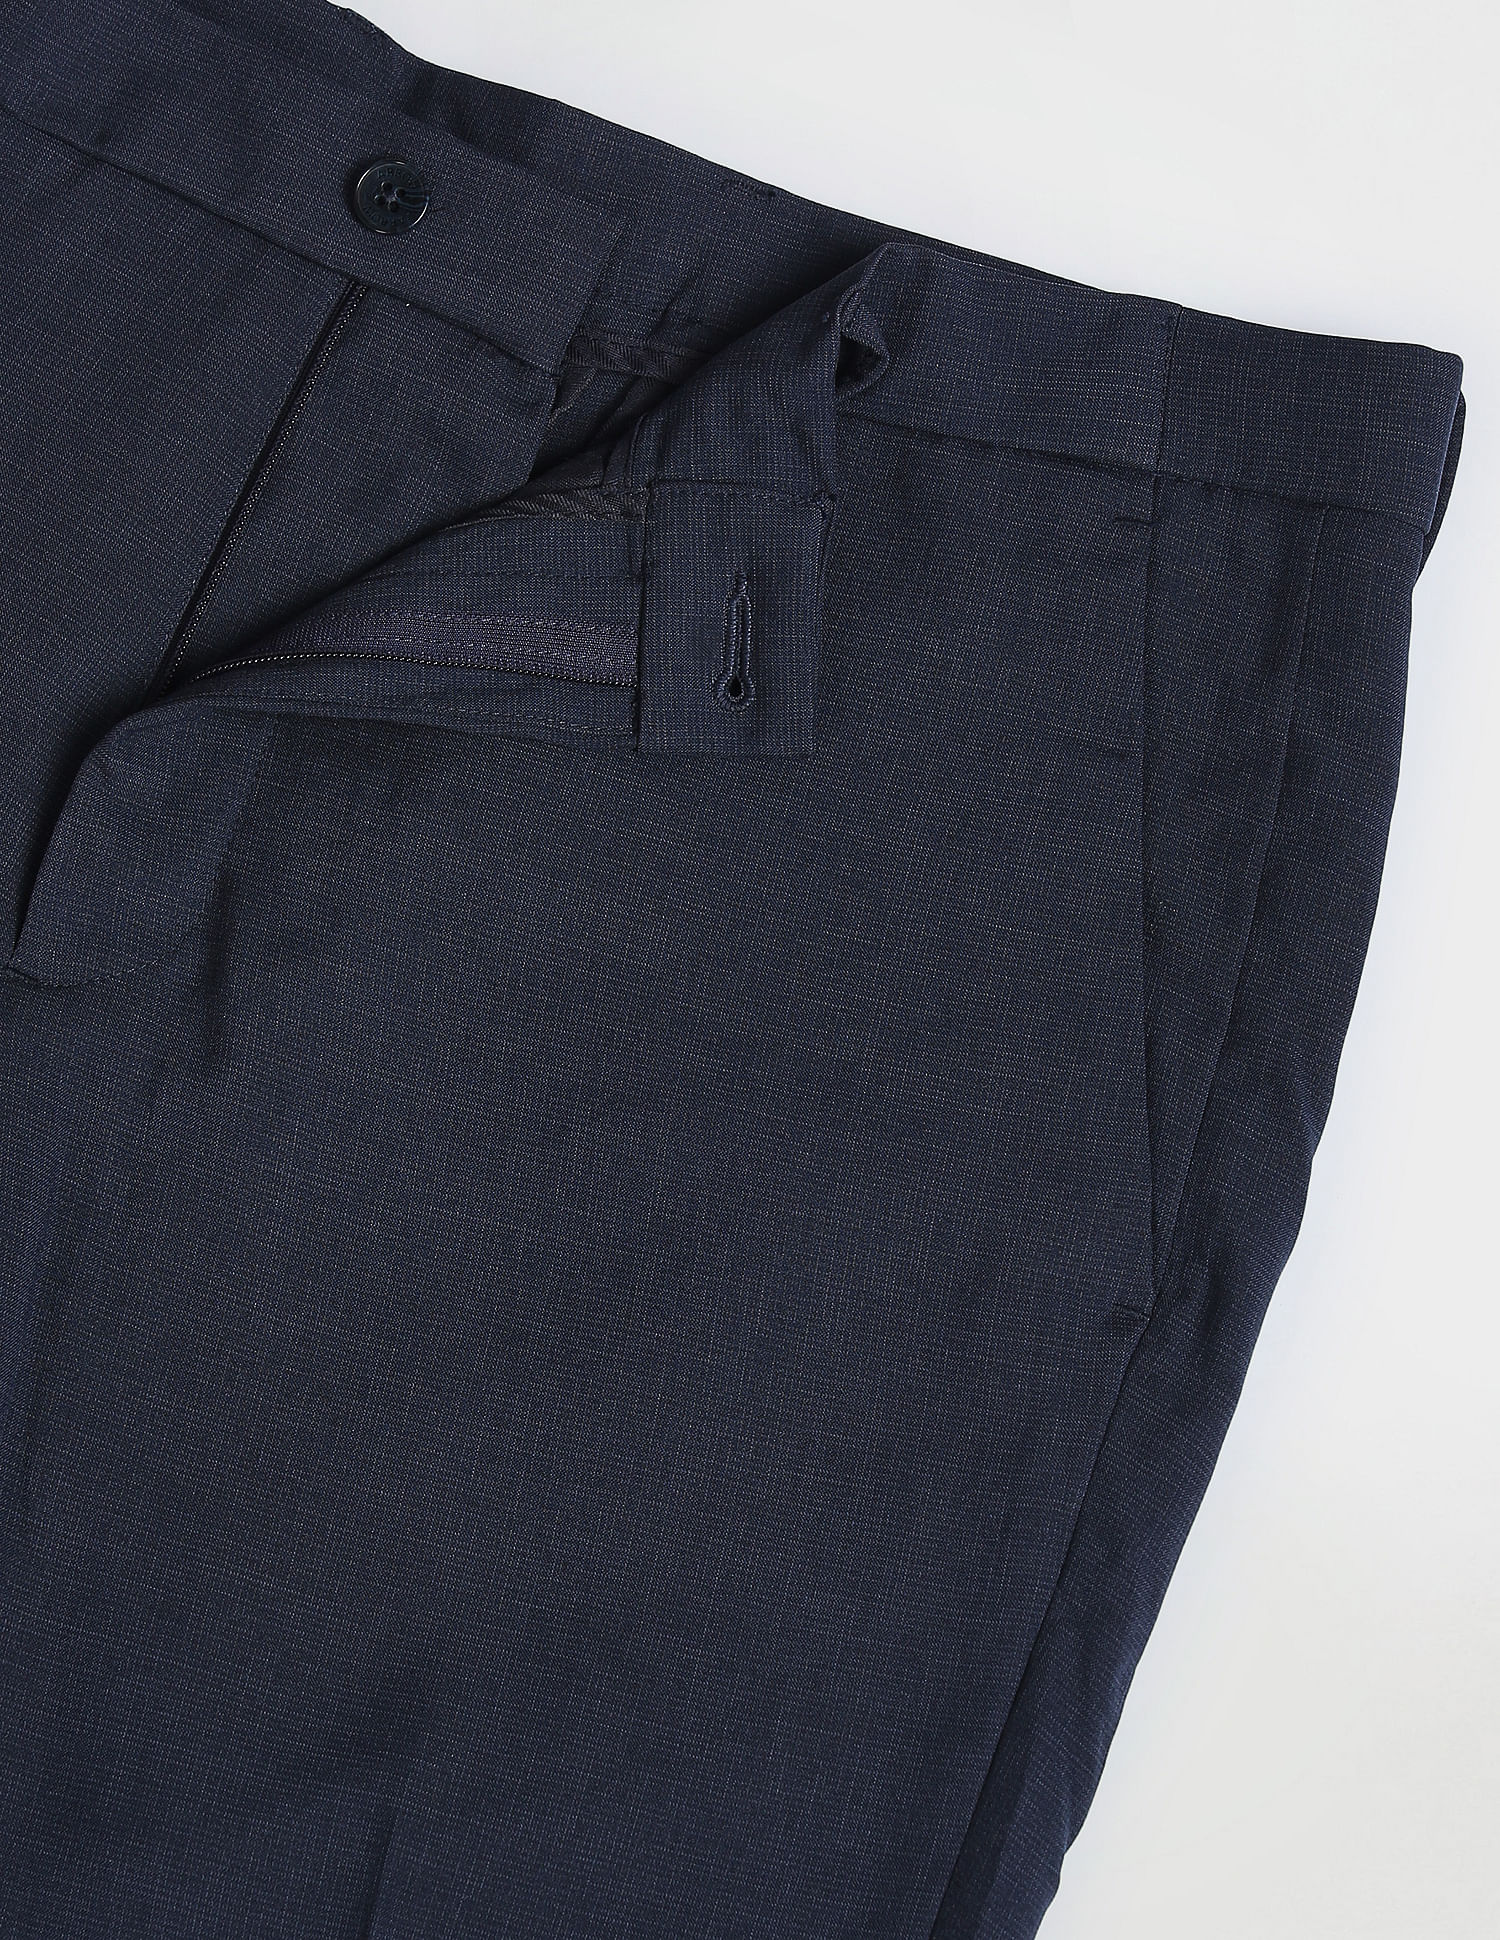 Buy Pollone Navy Tailored Fit Trouser  Zodiac